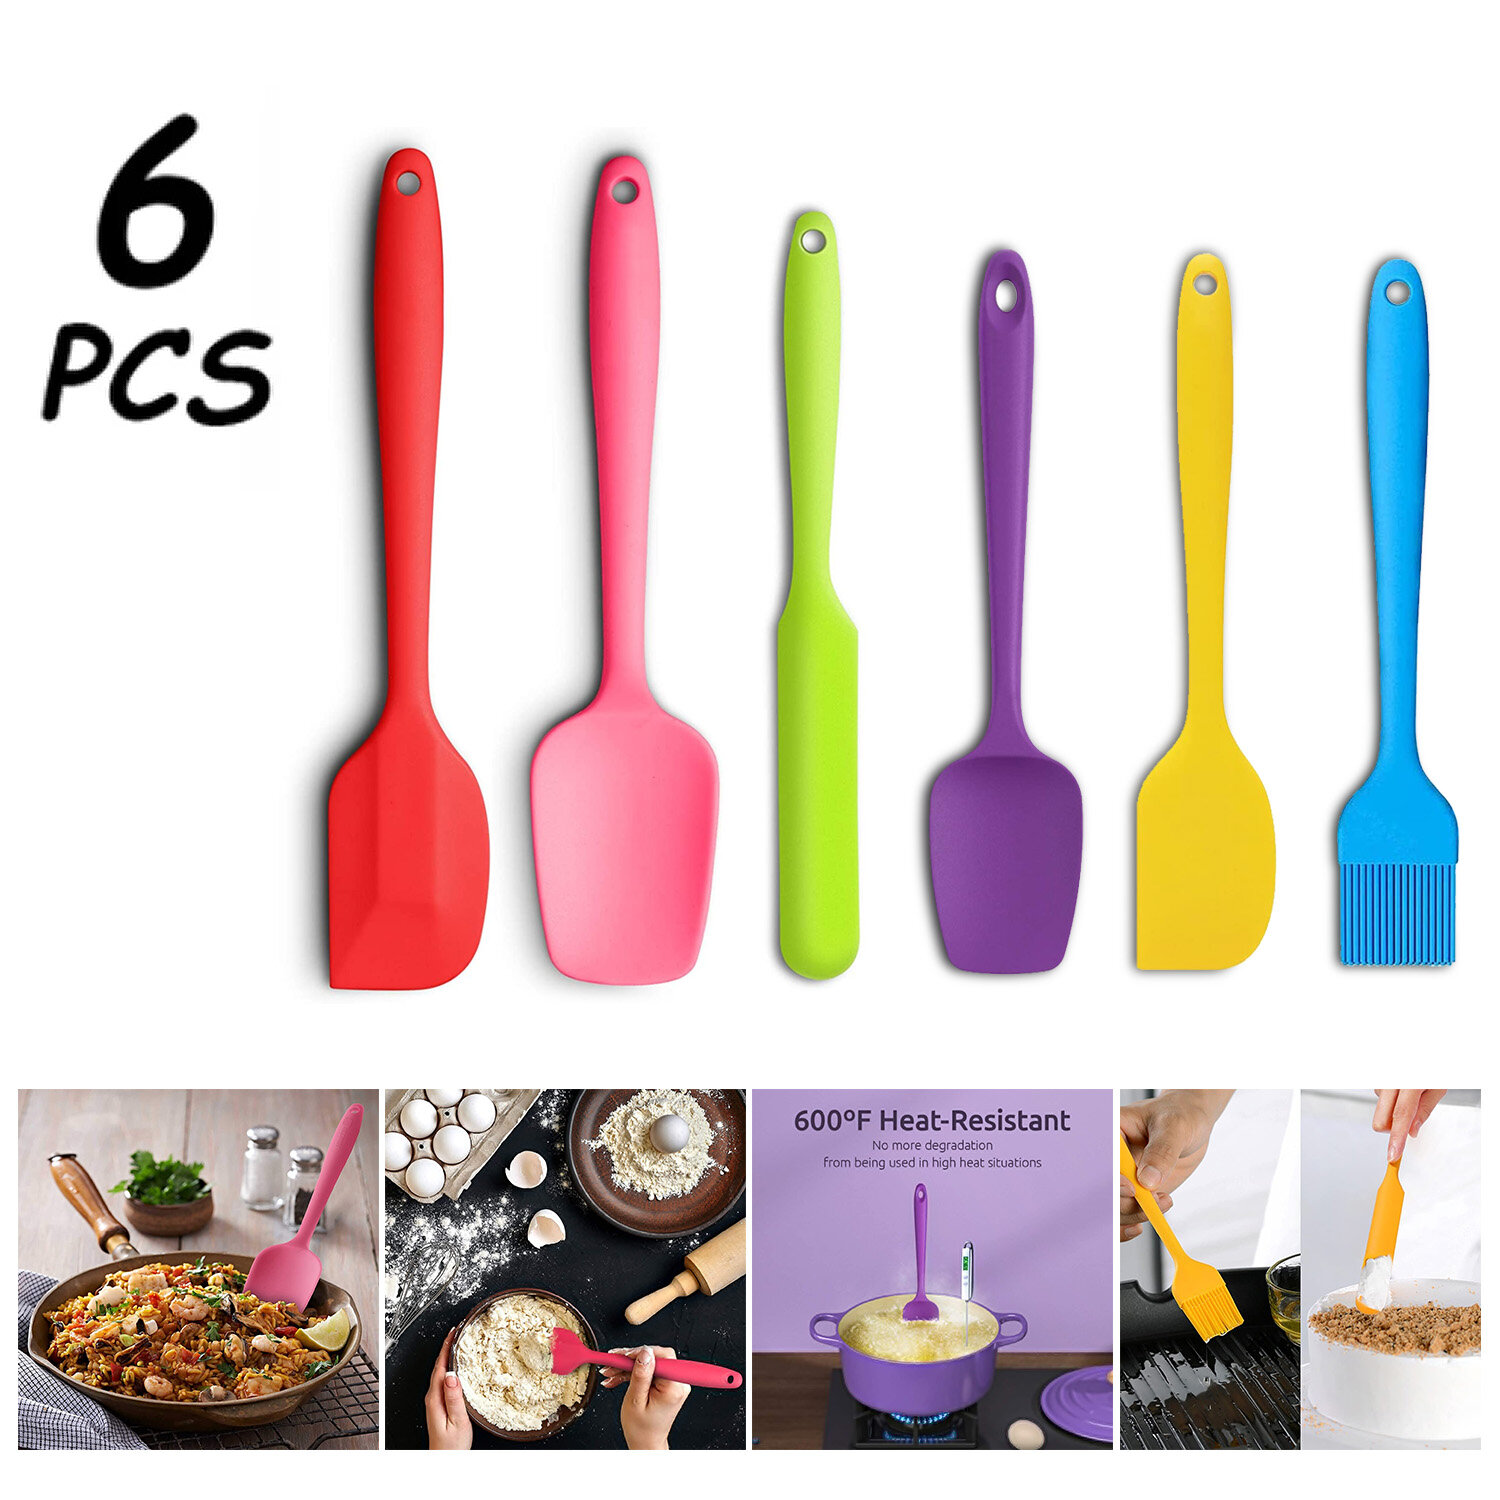 12PC Silicone Kitchen Utensils Set with Wooden Handles FDA Approved BPA free